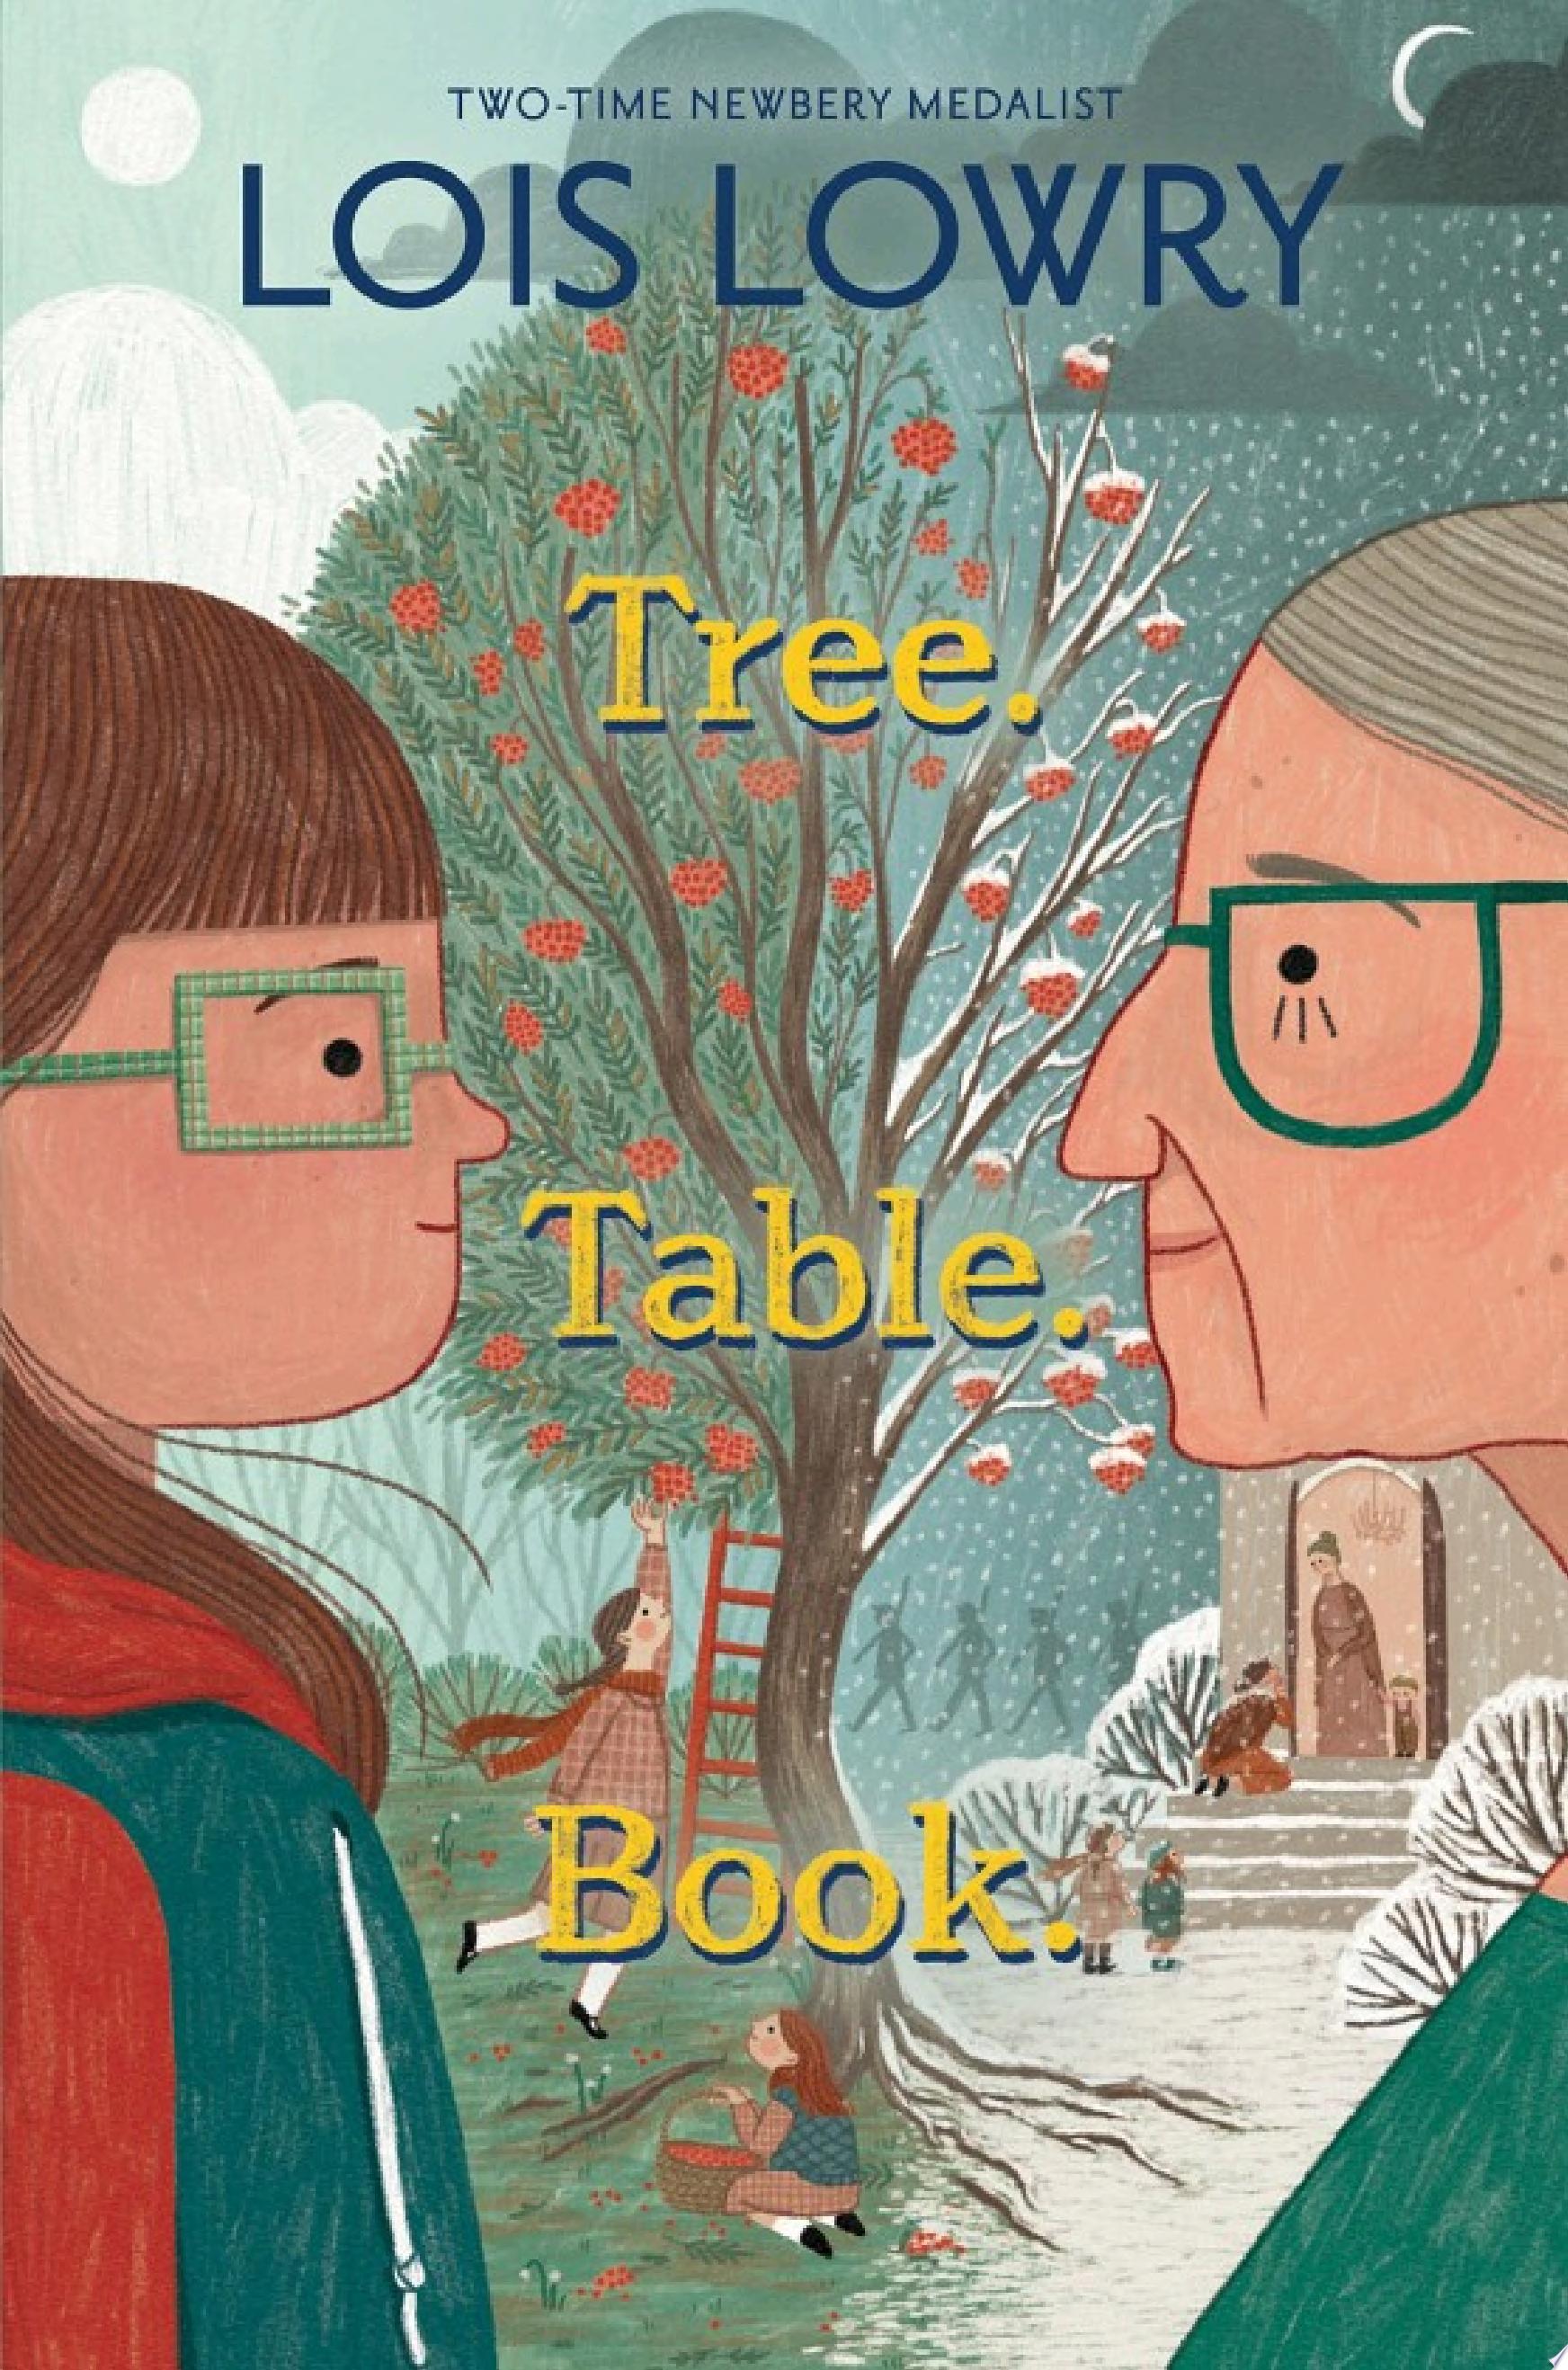 Image for "Tree. Table. Book."